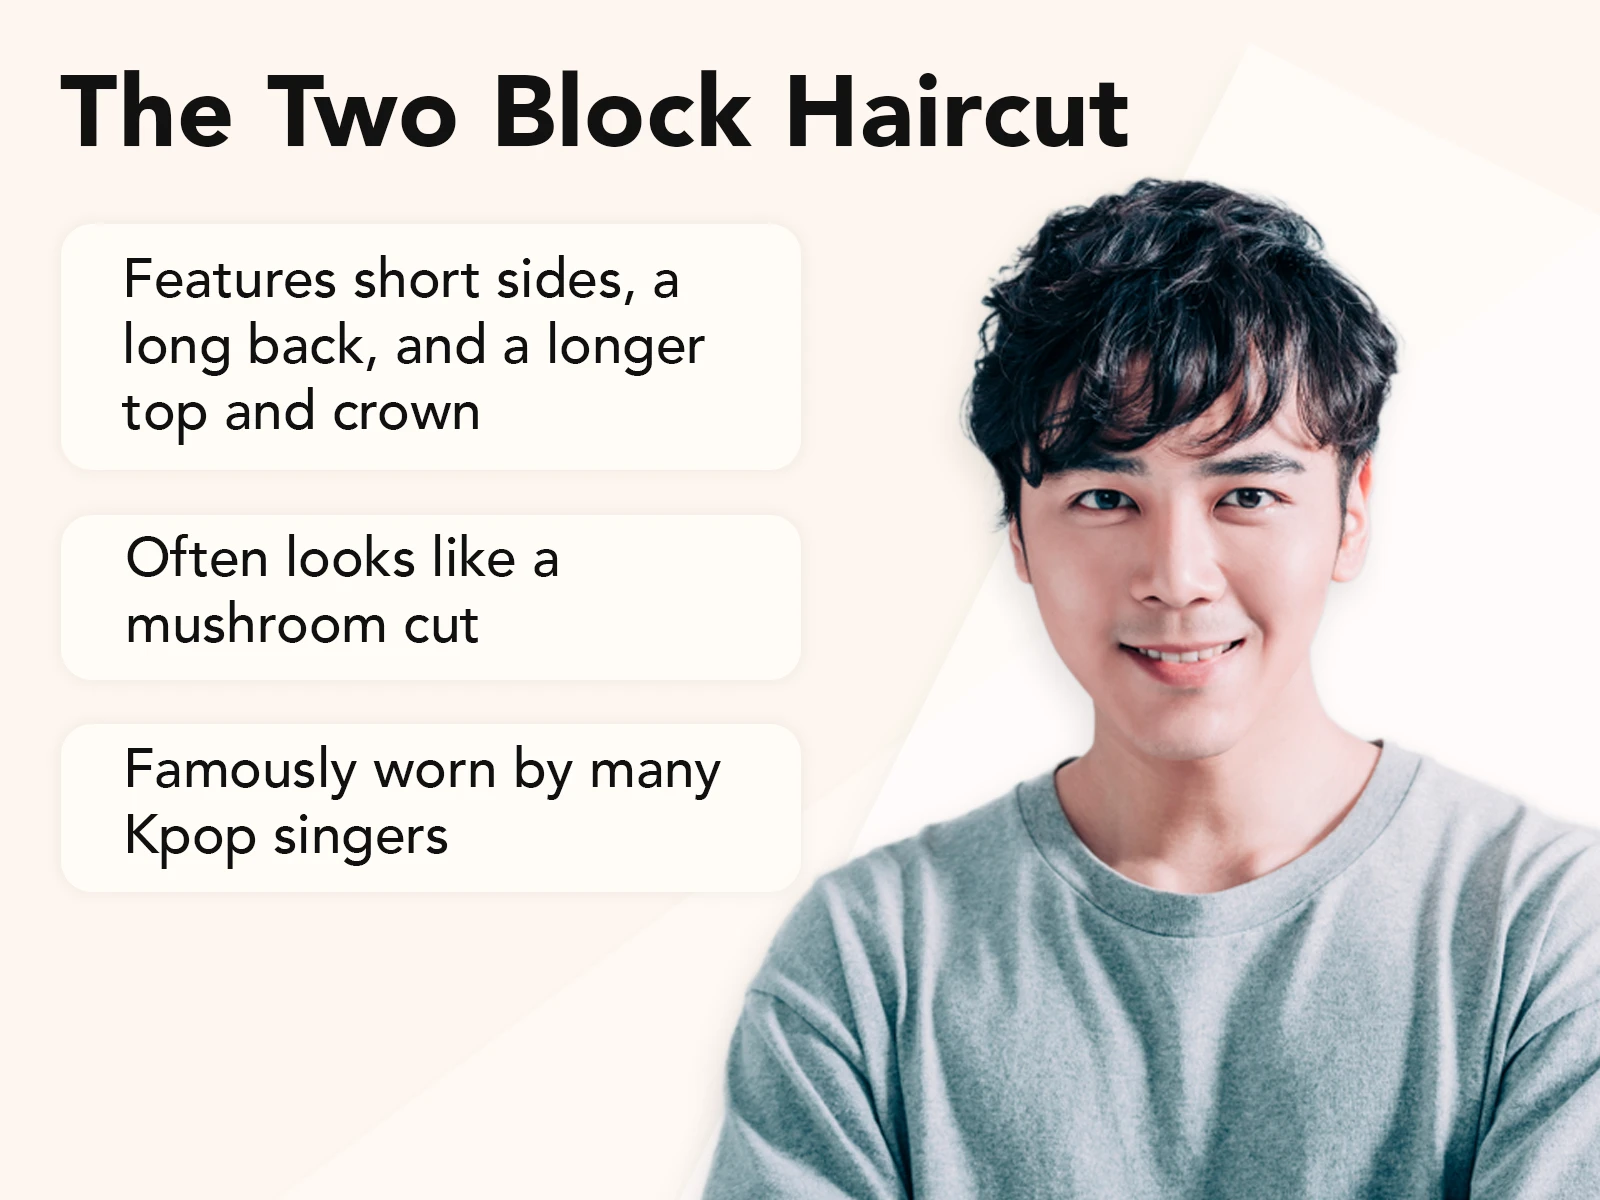 Two Block Haircut explainer image with a tan background